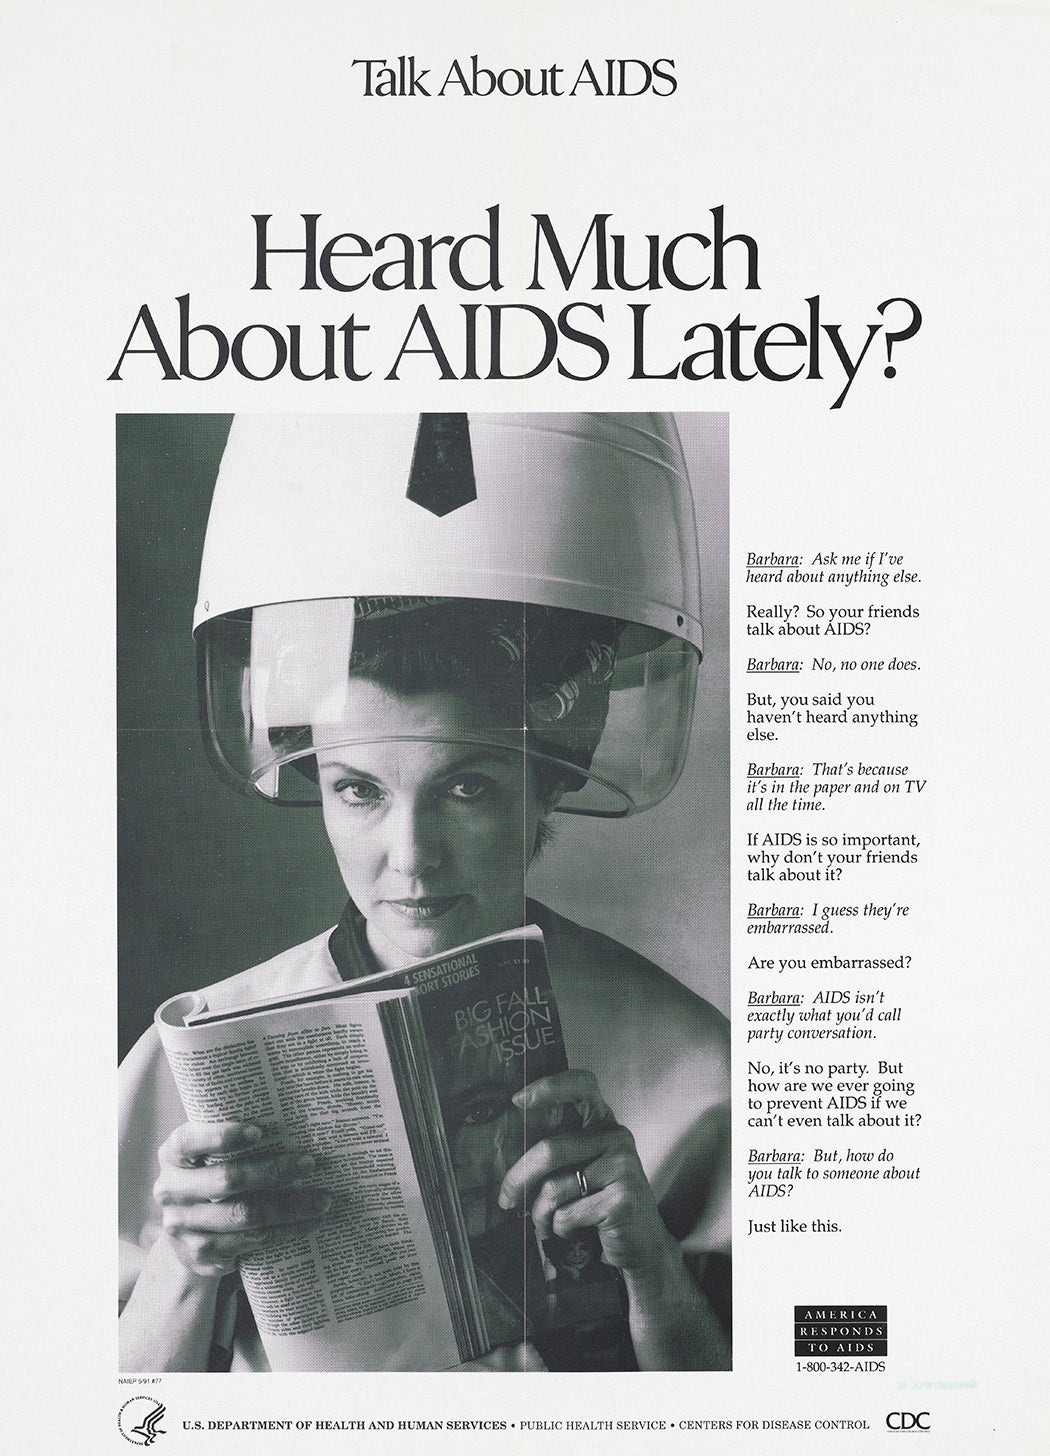 A woman holds a magazine with her hair in rollers under a hair dryer. The poster says, Heard Much about AIDs lately?